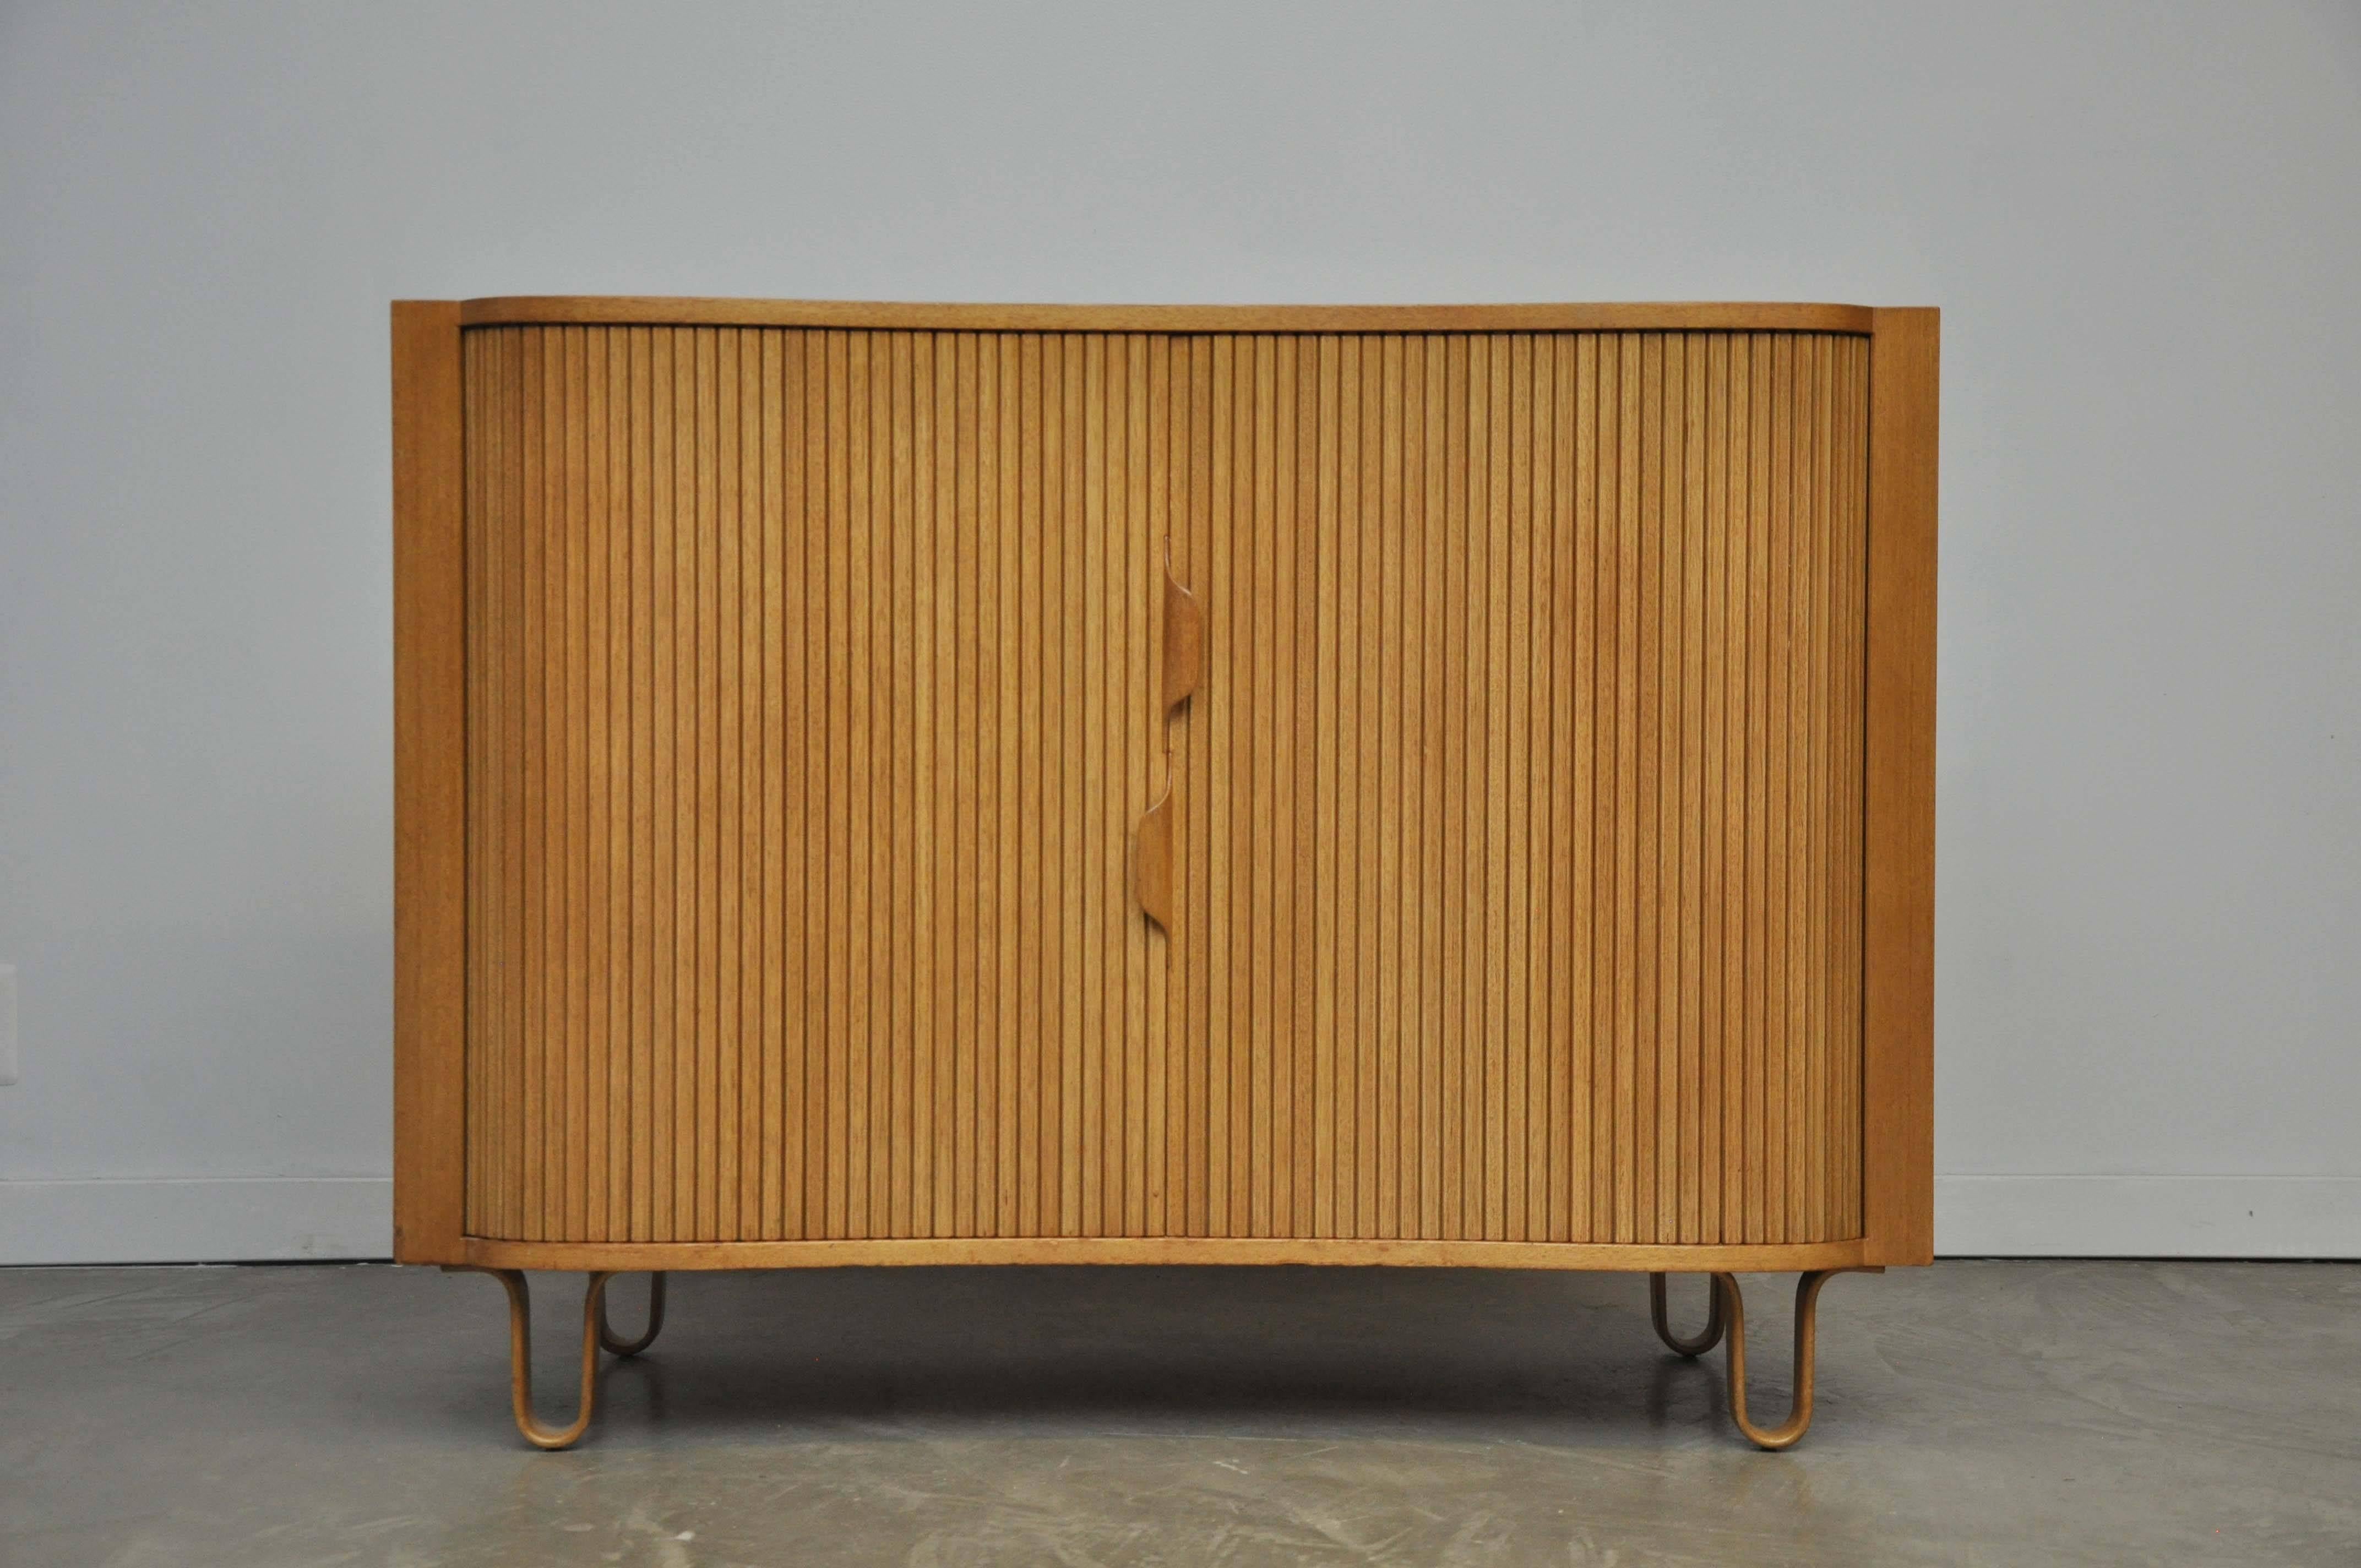 Pair of chests by Edward Wormley for Dunbar. Tambour doors open to reveal many storage drawers. Rare form with bentwood legs, circa 1950.